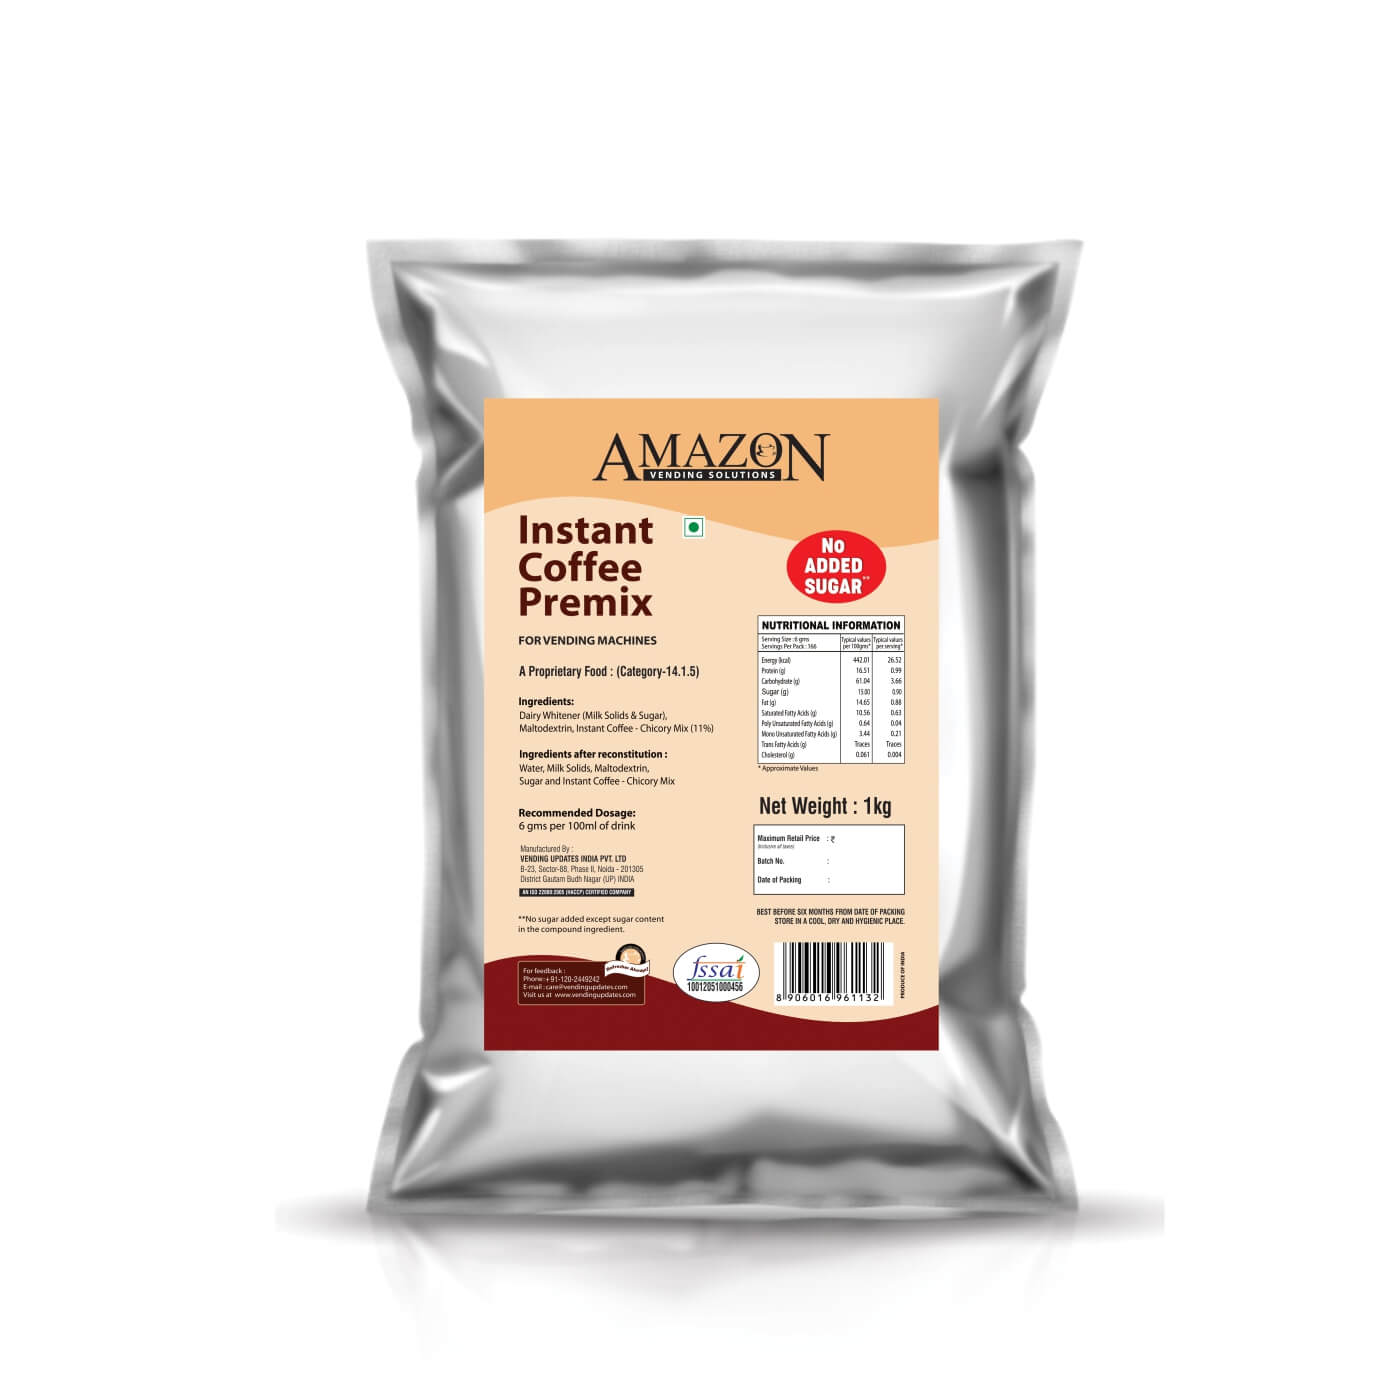 Amazon 3 in 1 Instant Coffee Premix with No Added Sugar